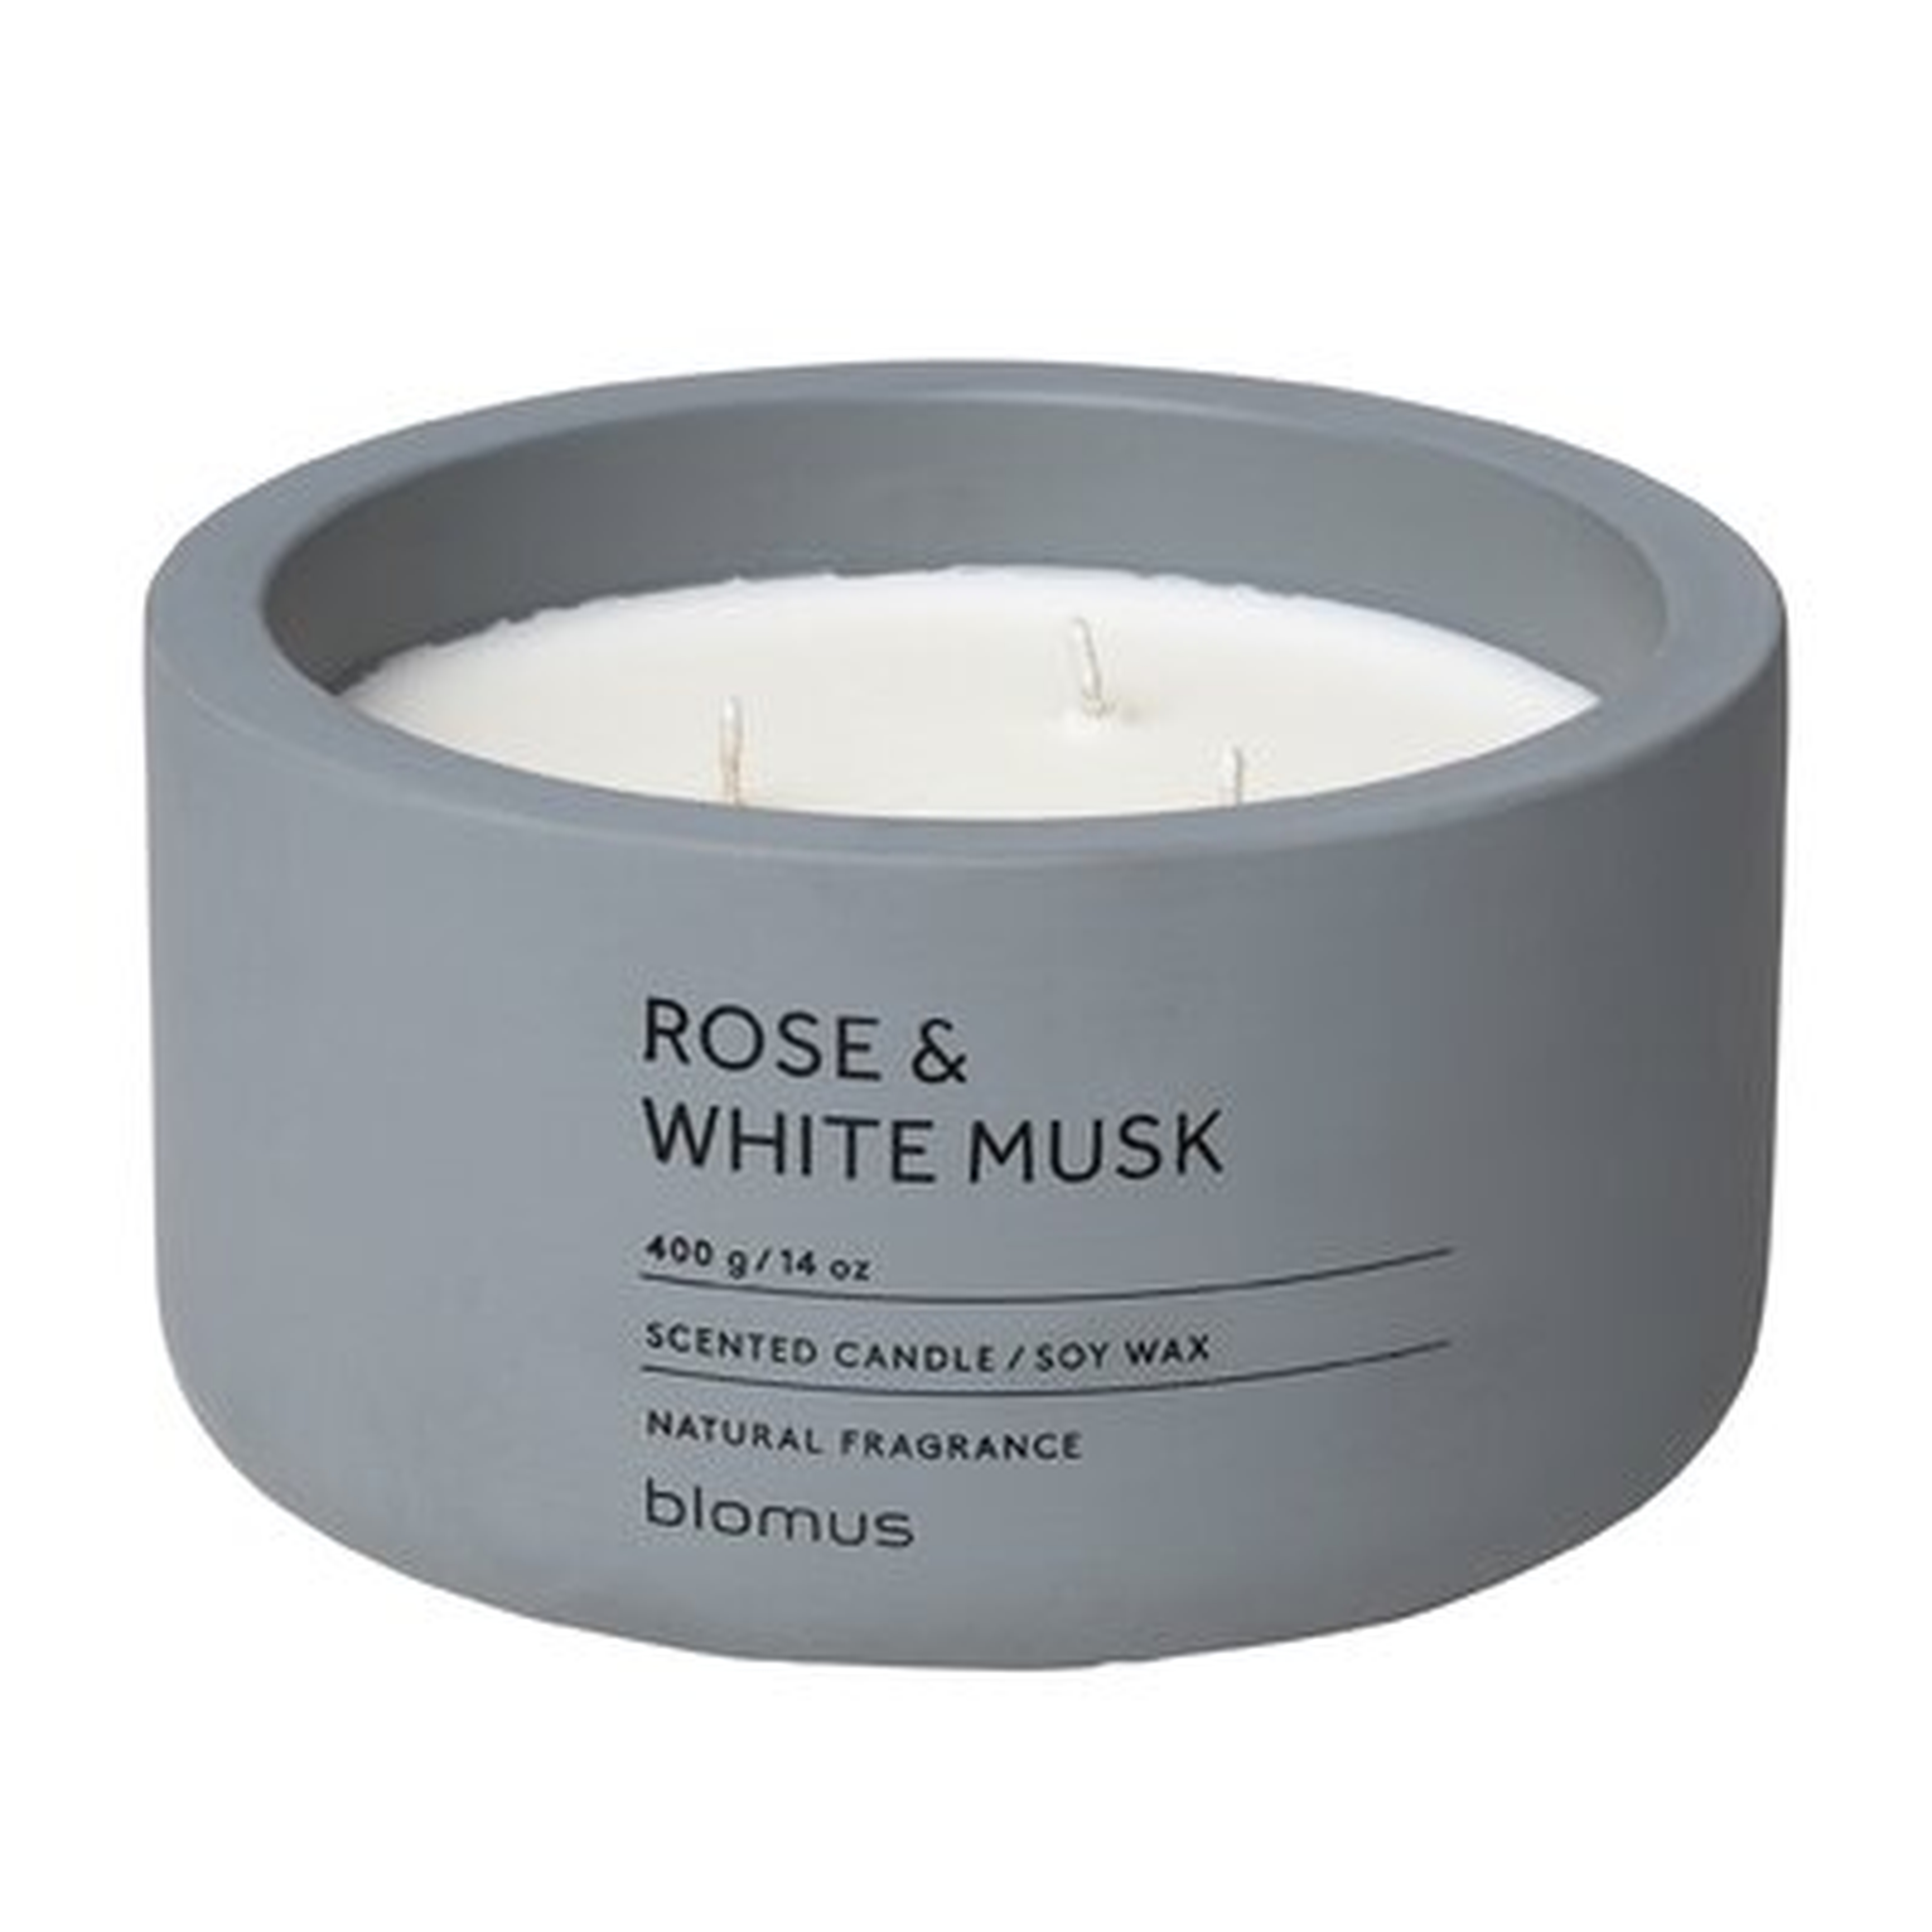 Rose and White Musk Scented Jar Candle - AllModern